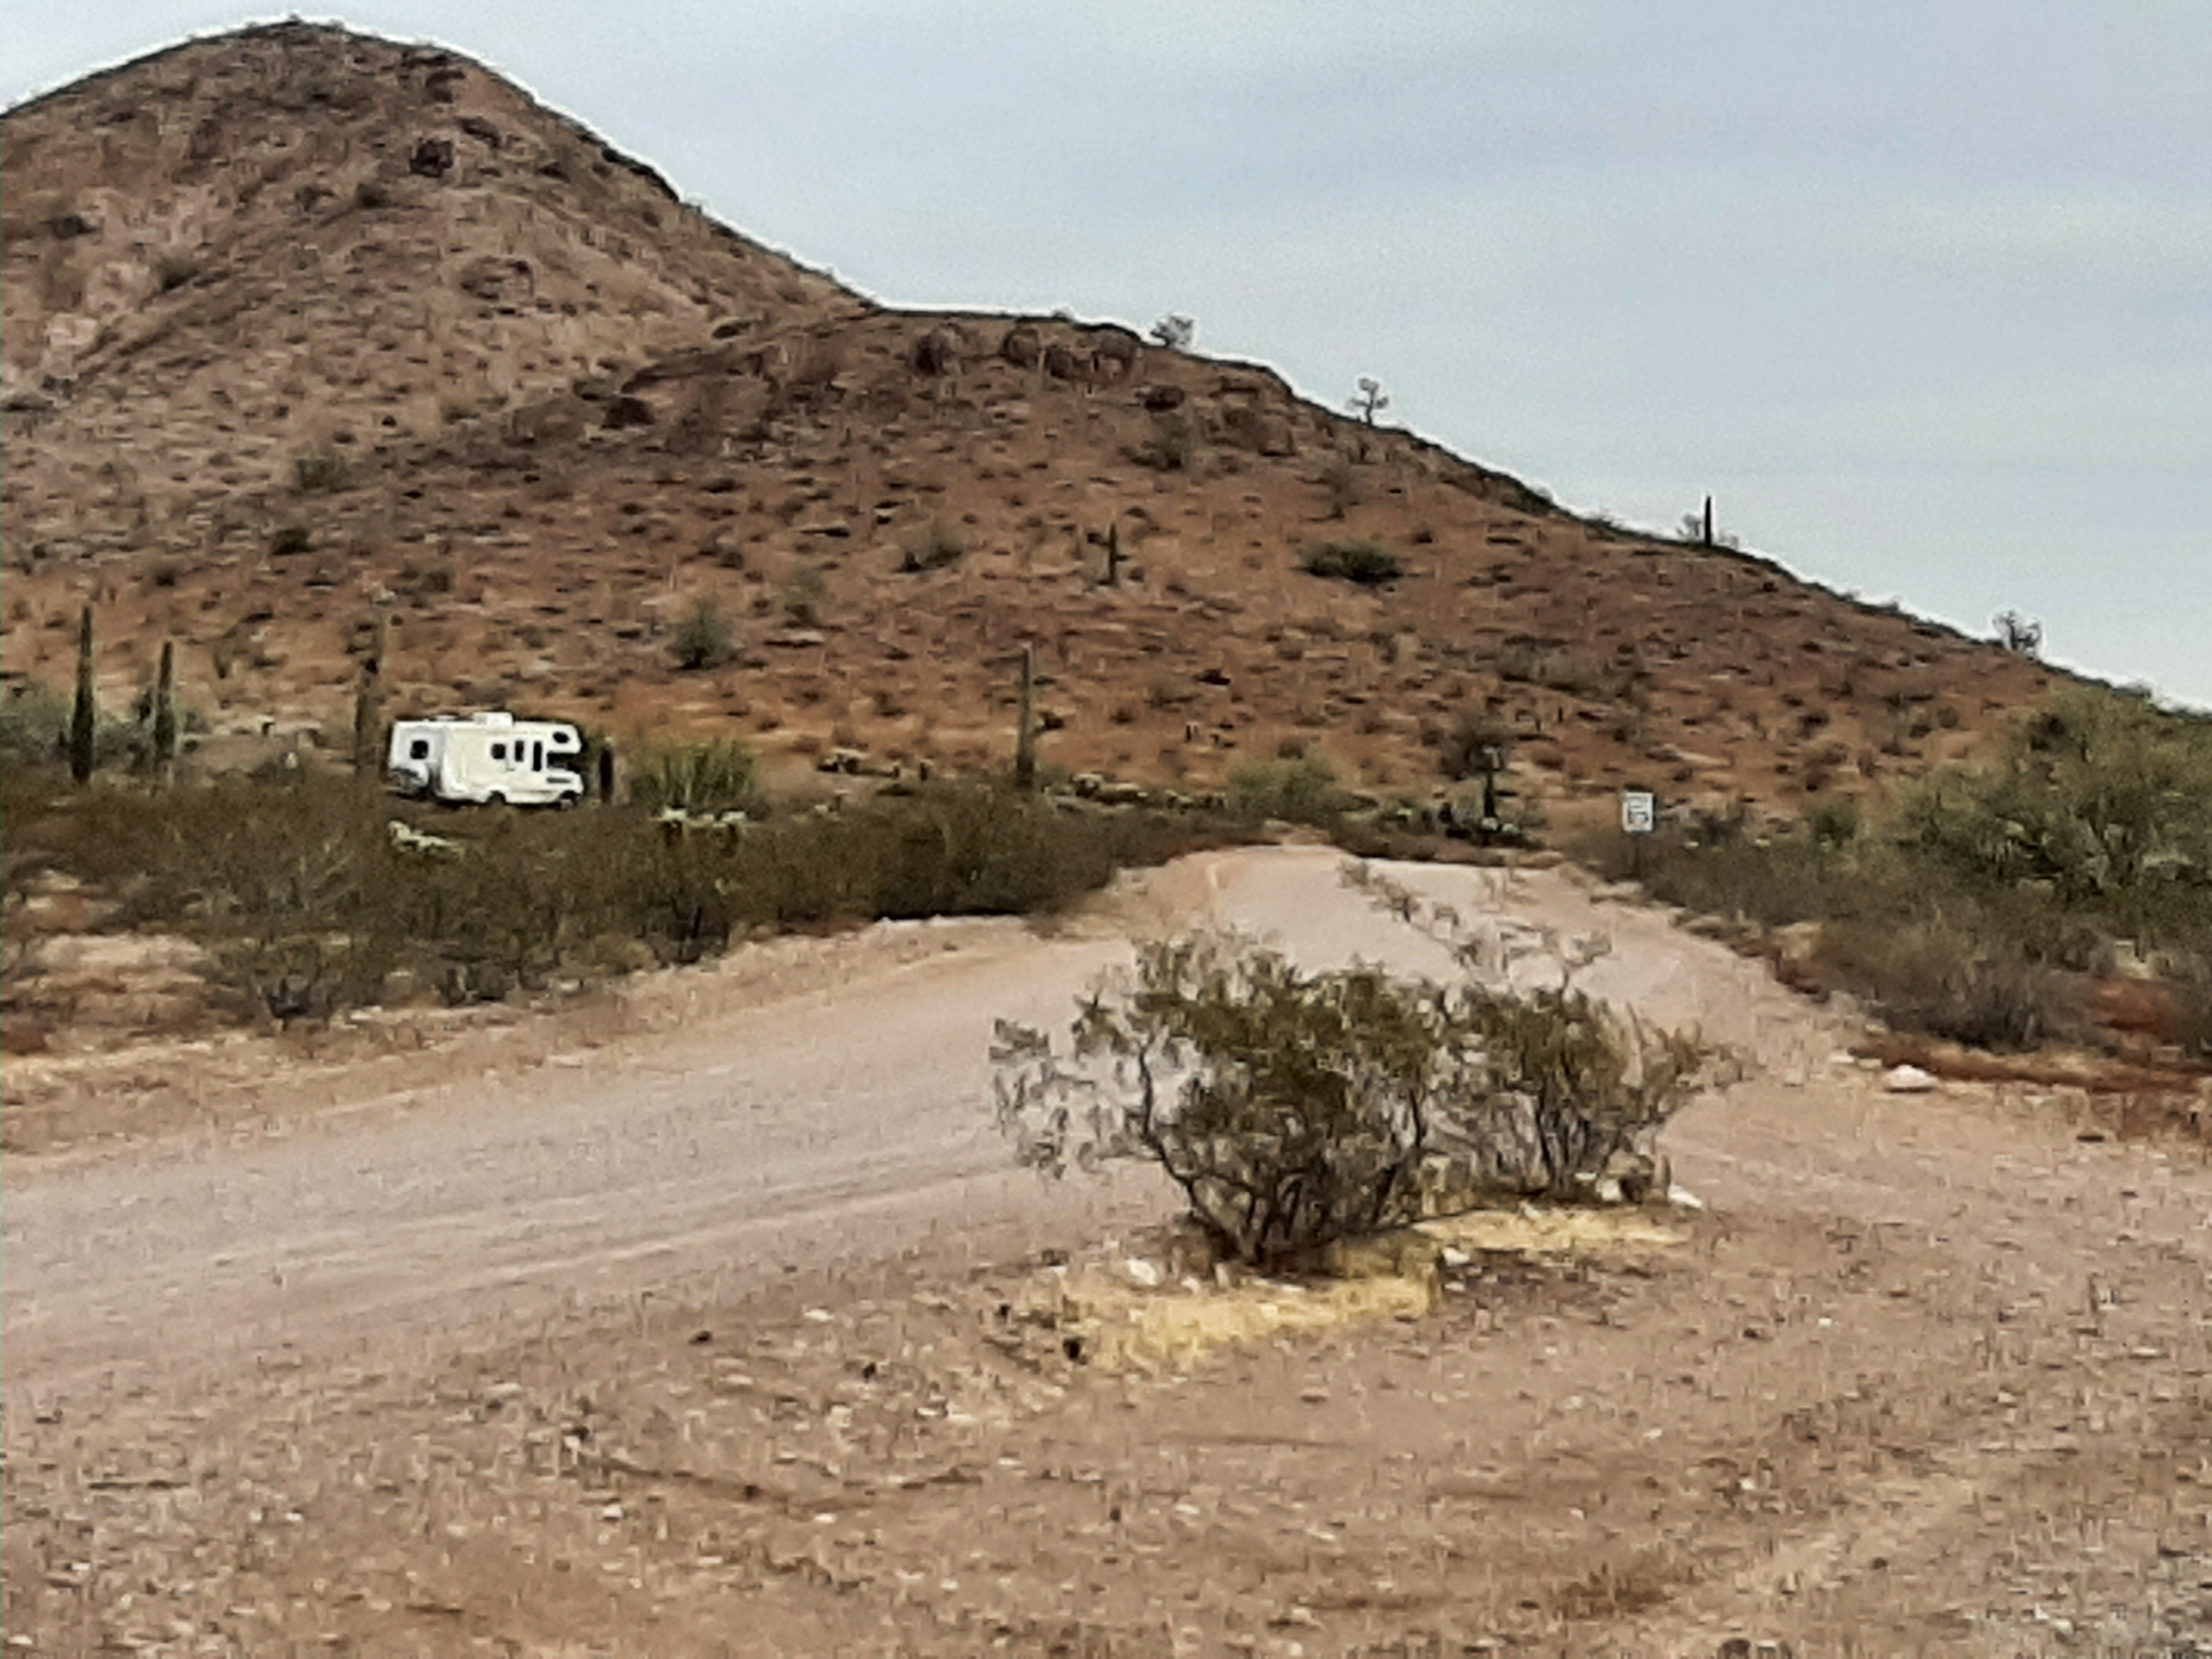 Camper submitted image from KOFA National Wildlife Refuge - King Valley Road - 3